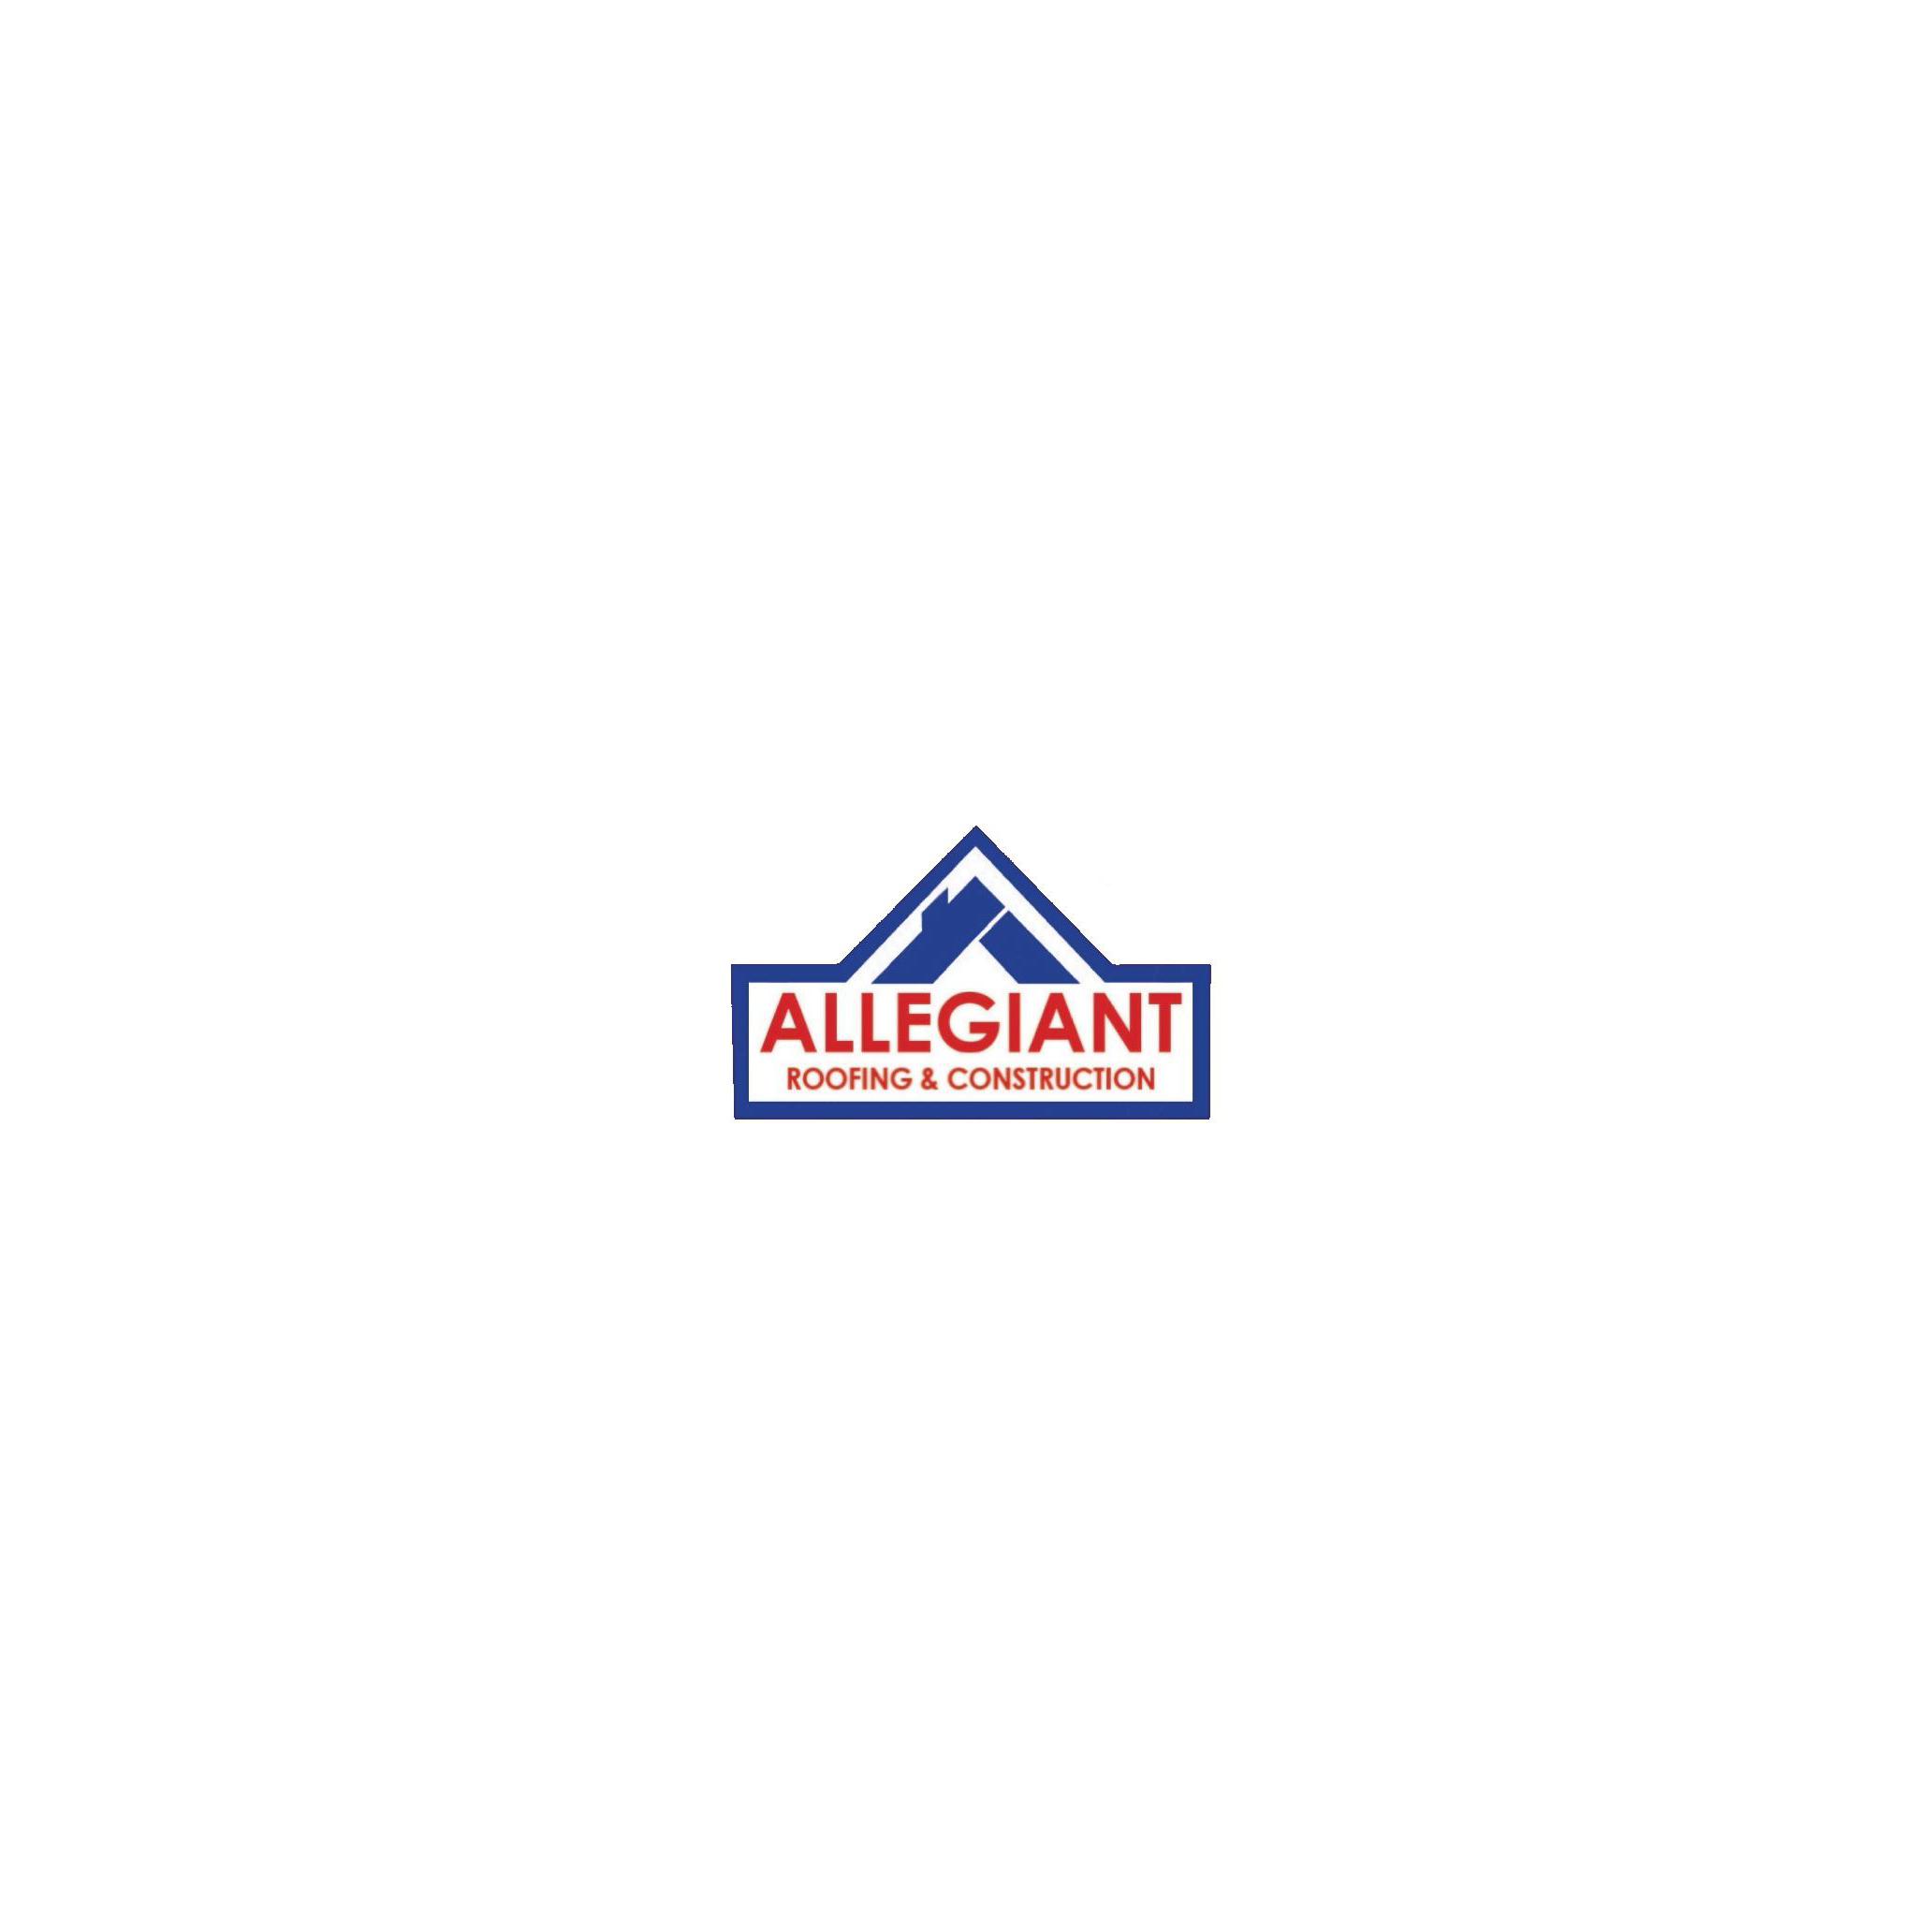 Allegiant Roofing And Construction LLC - Lindale, TX - (469)901-0959 | ShowMeLocal.com